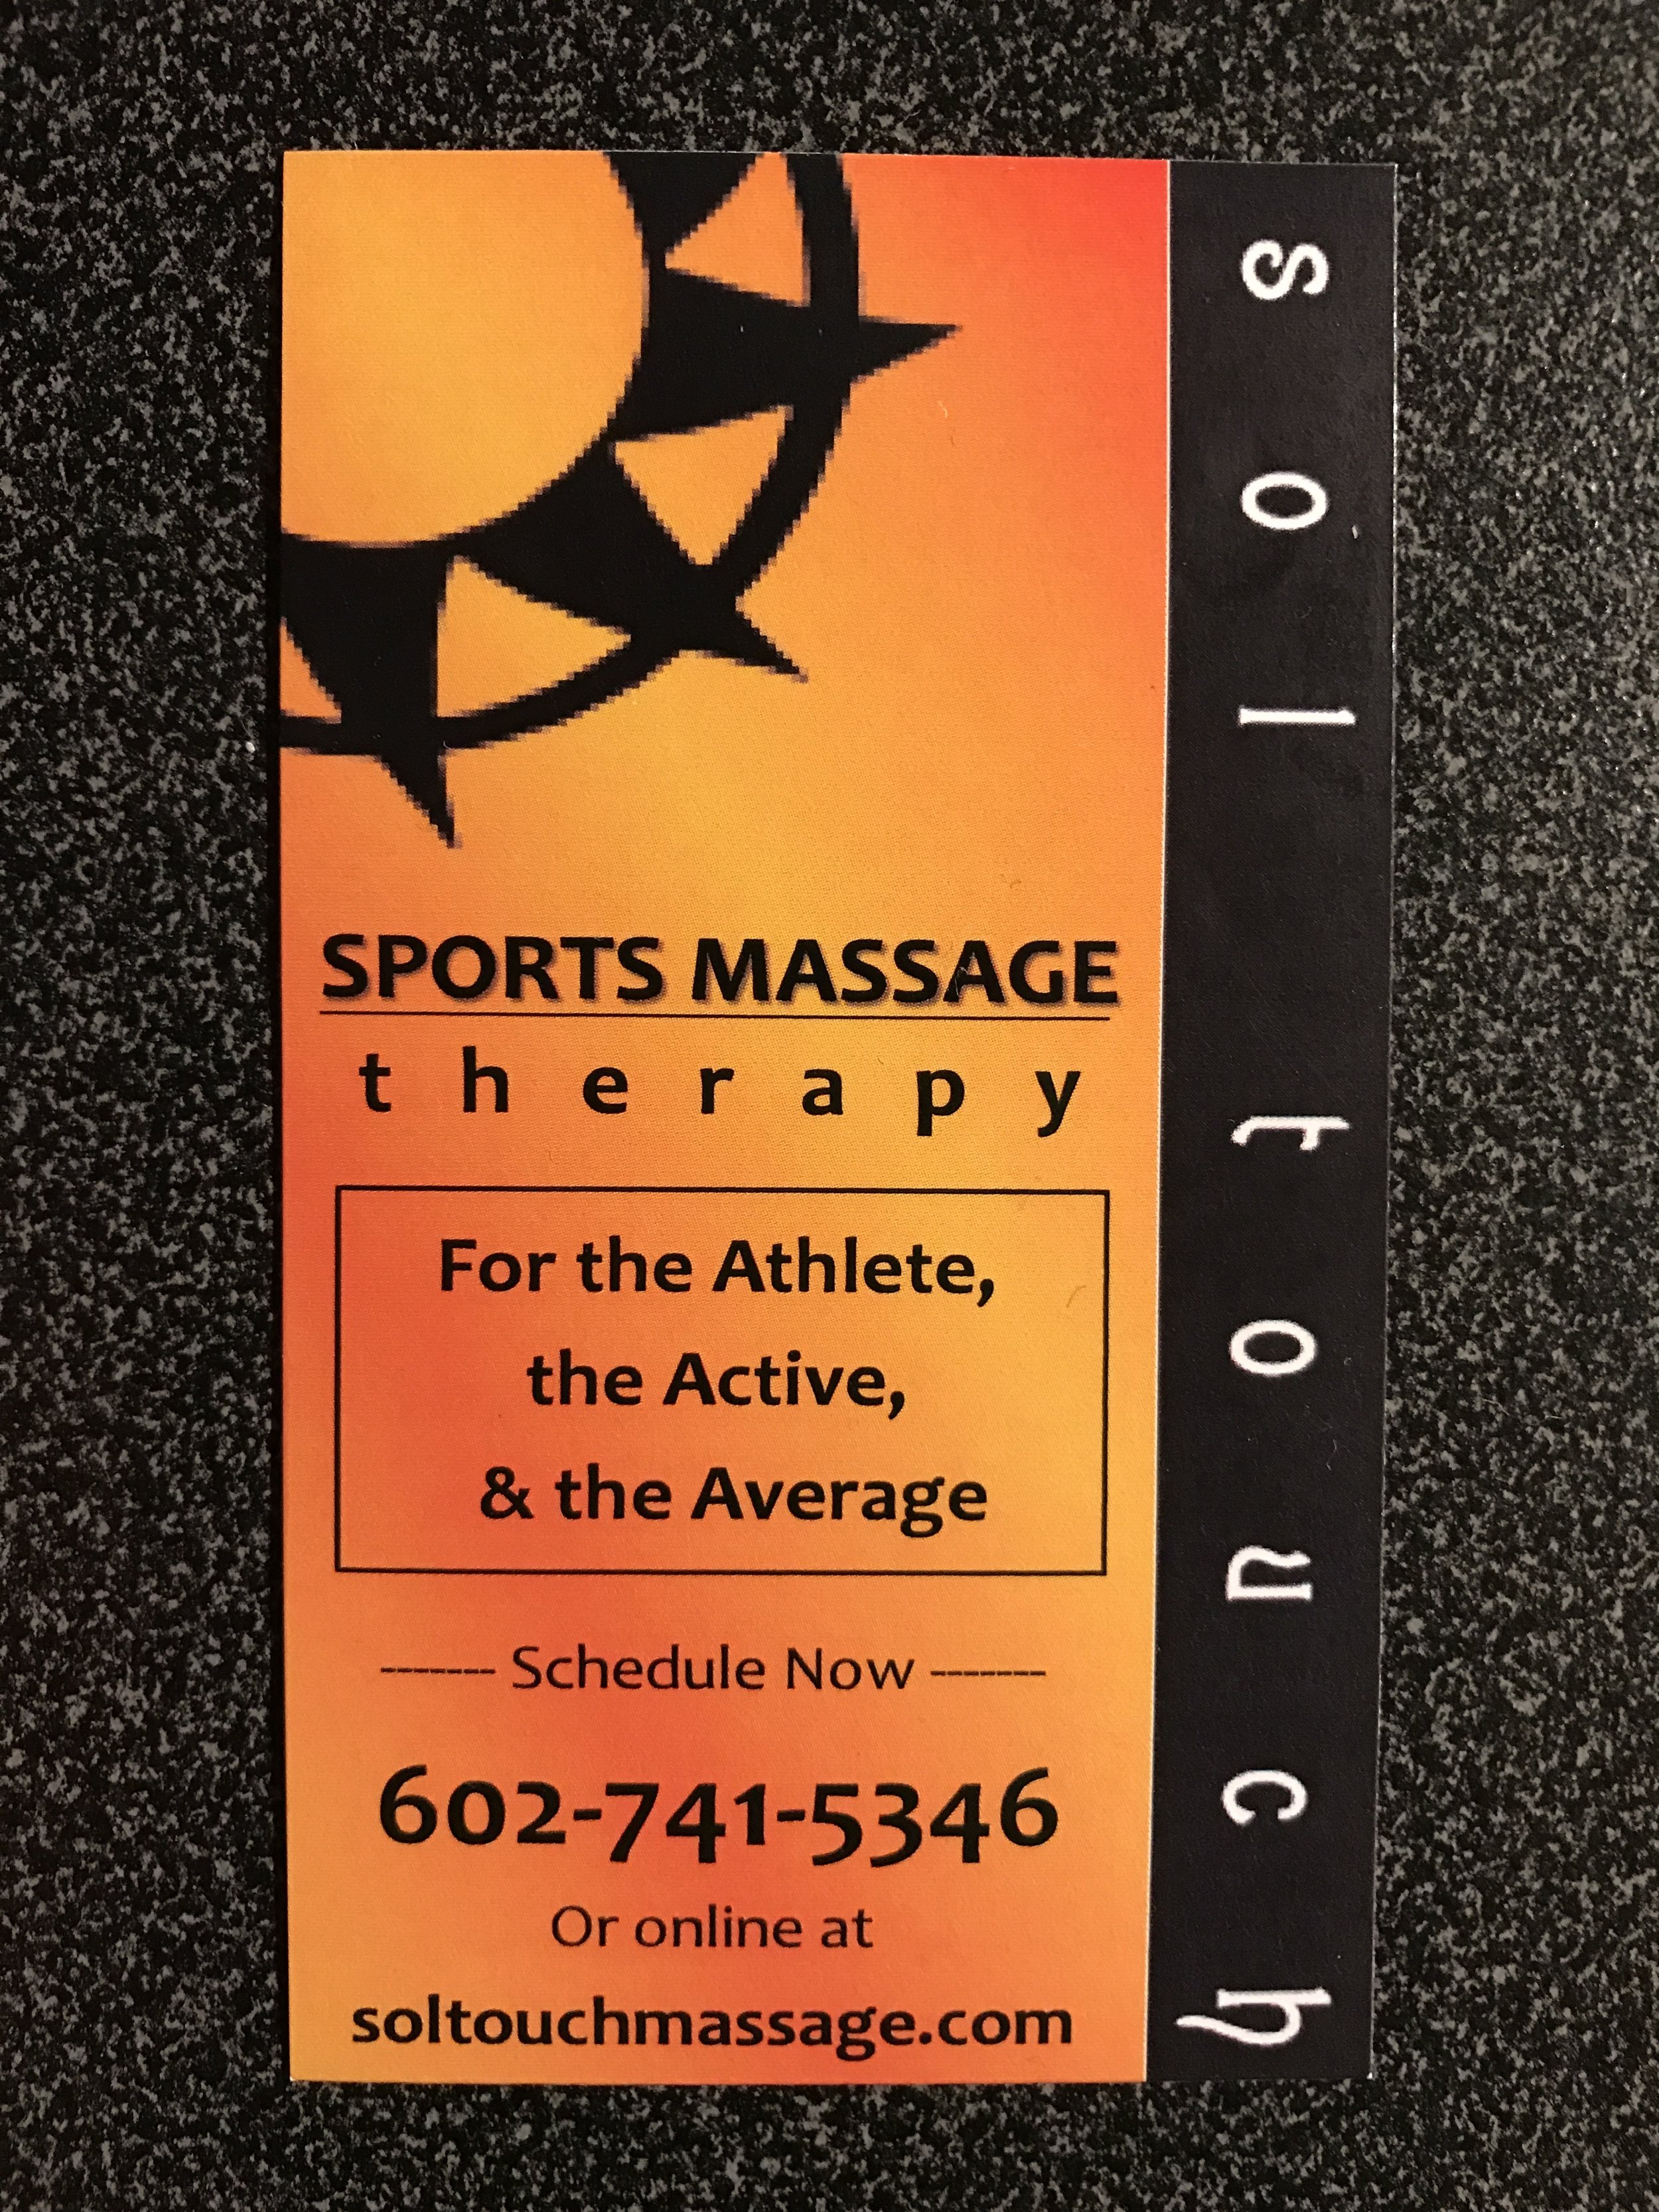 Massage business card printed in 2017.